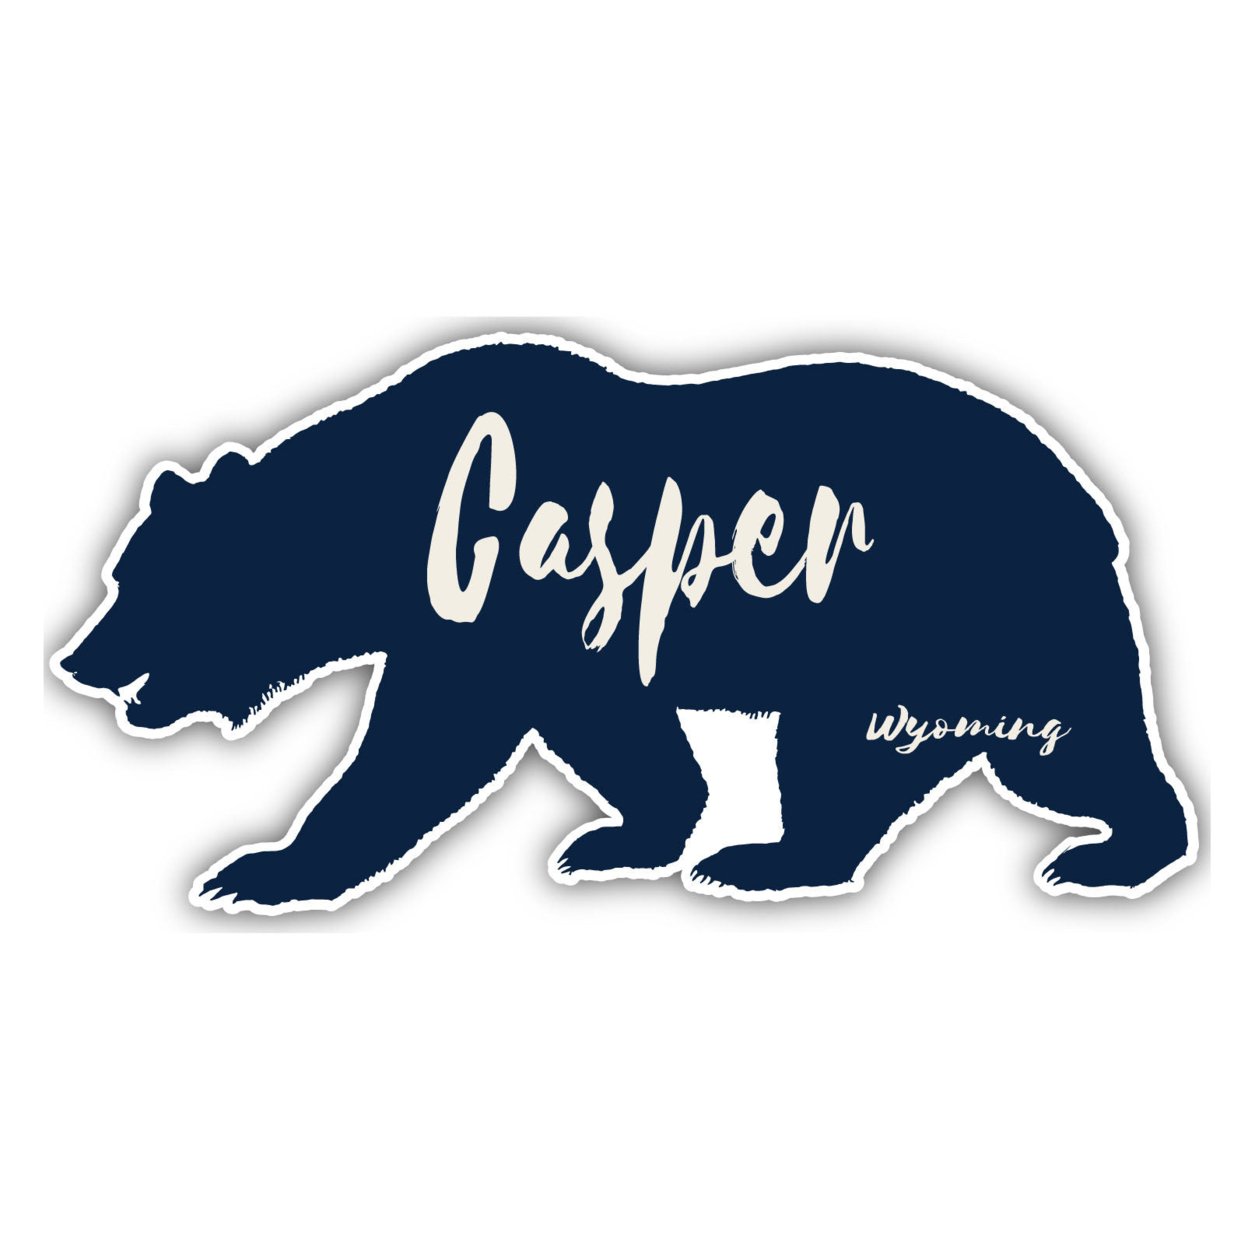 Casper Wyoming Souvenir Decorative Stickers (Choose Theme And Size) - 4-Pack, 10-Inch, Tent